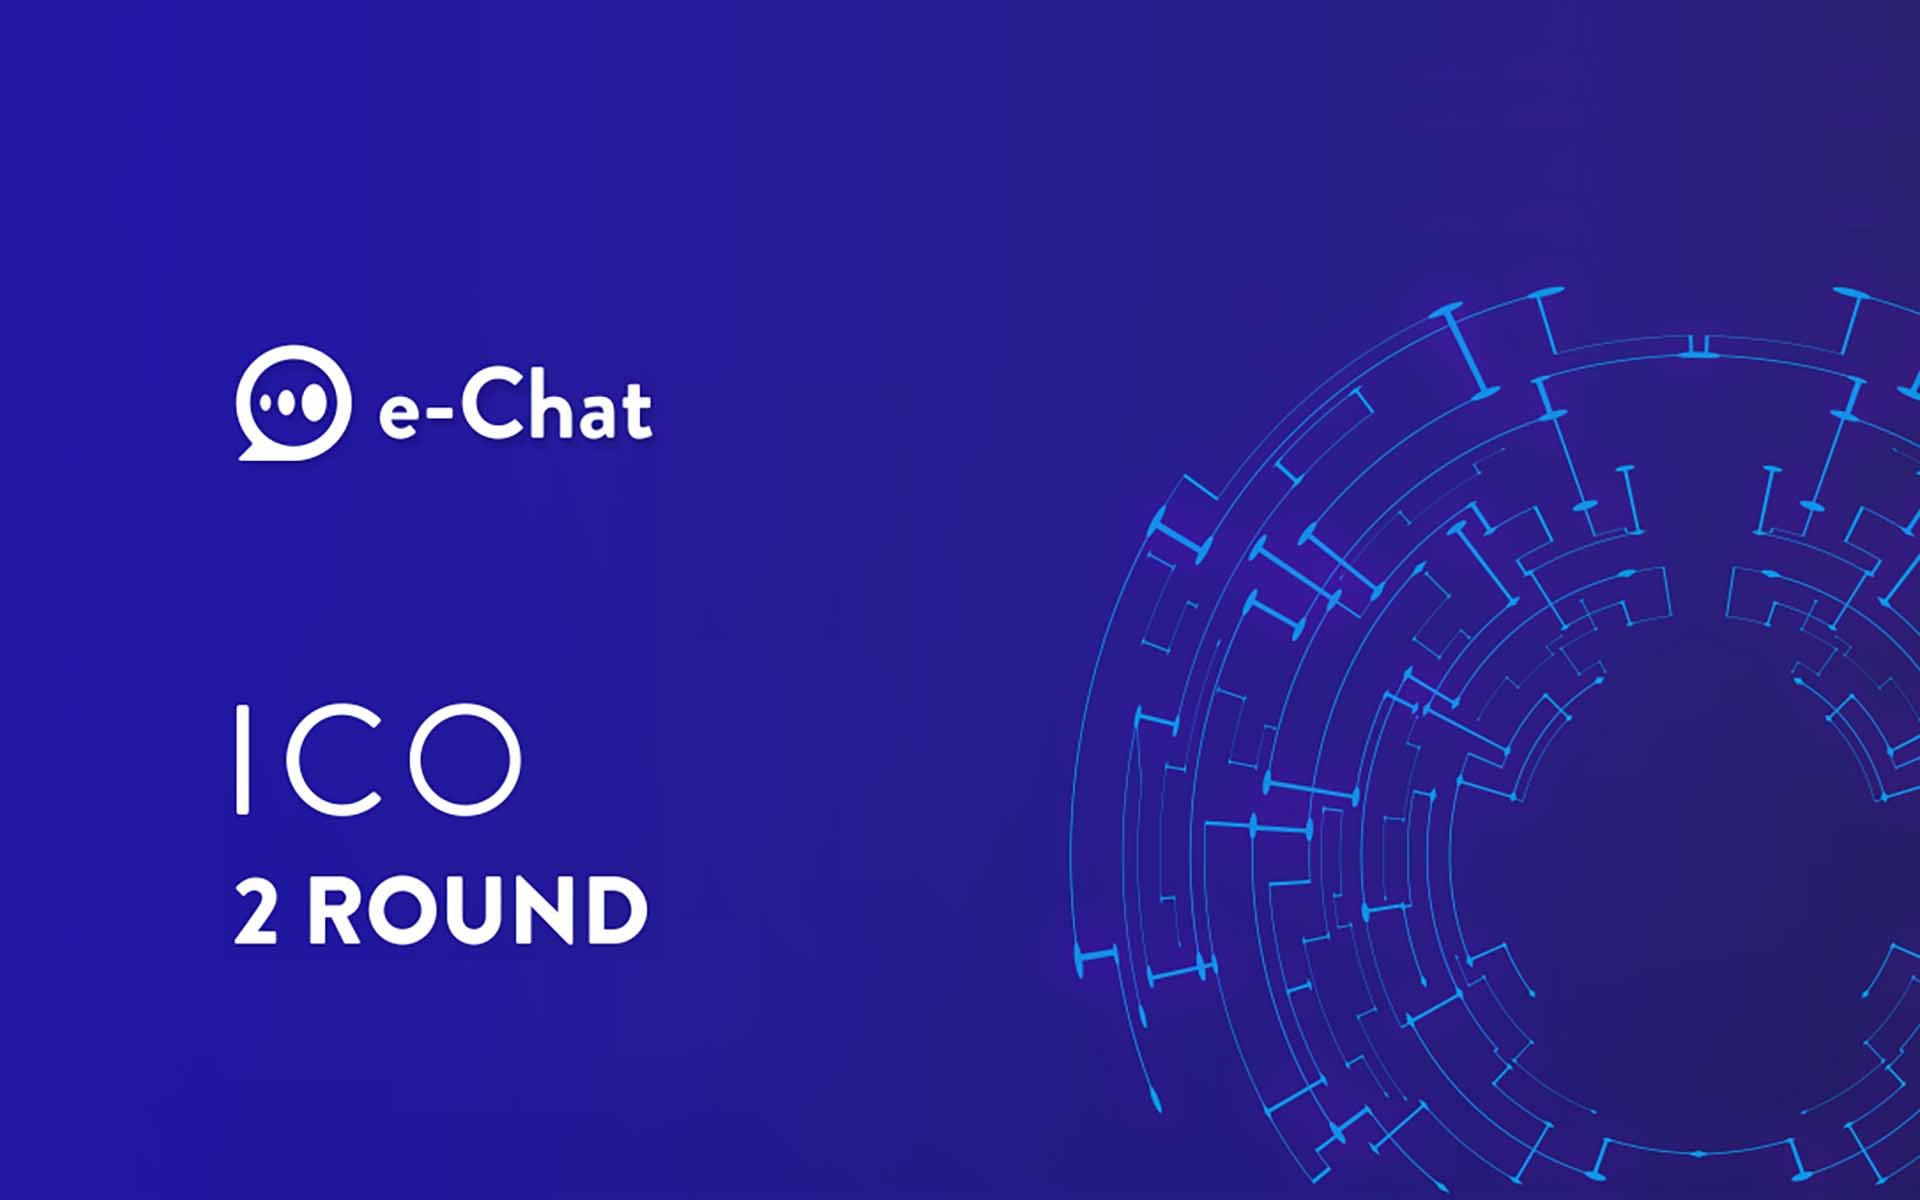 The Second Round of e-Chat ICO, First Decentralized Messenger, Ends in 10 Days!